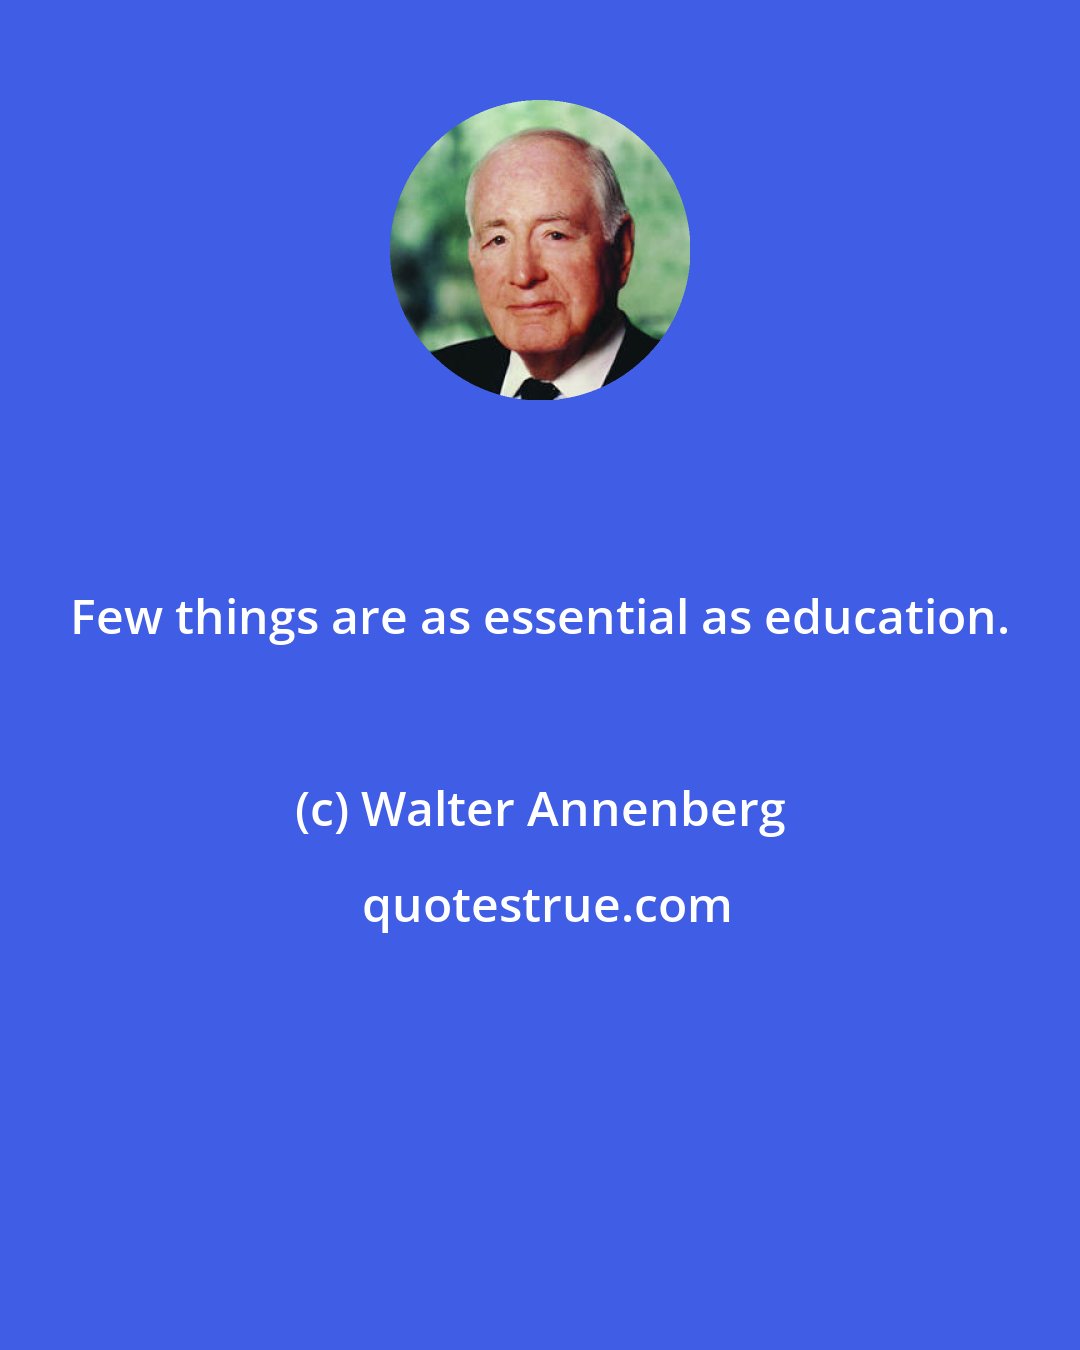 Walter Annenberg: Few things are as essential as education.